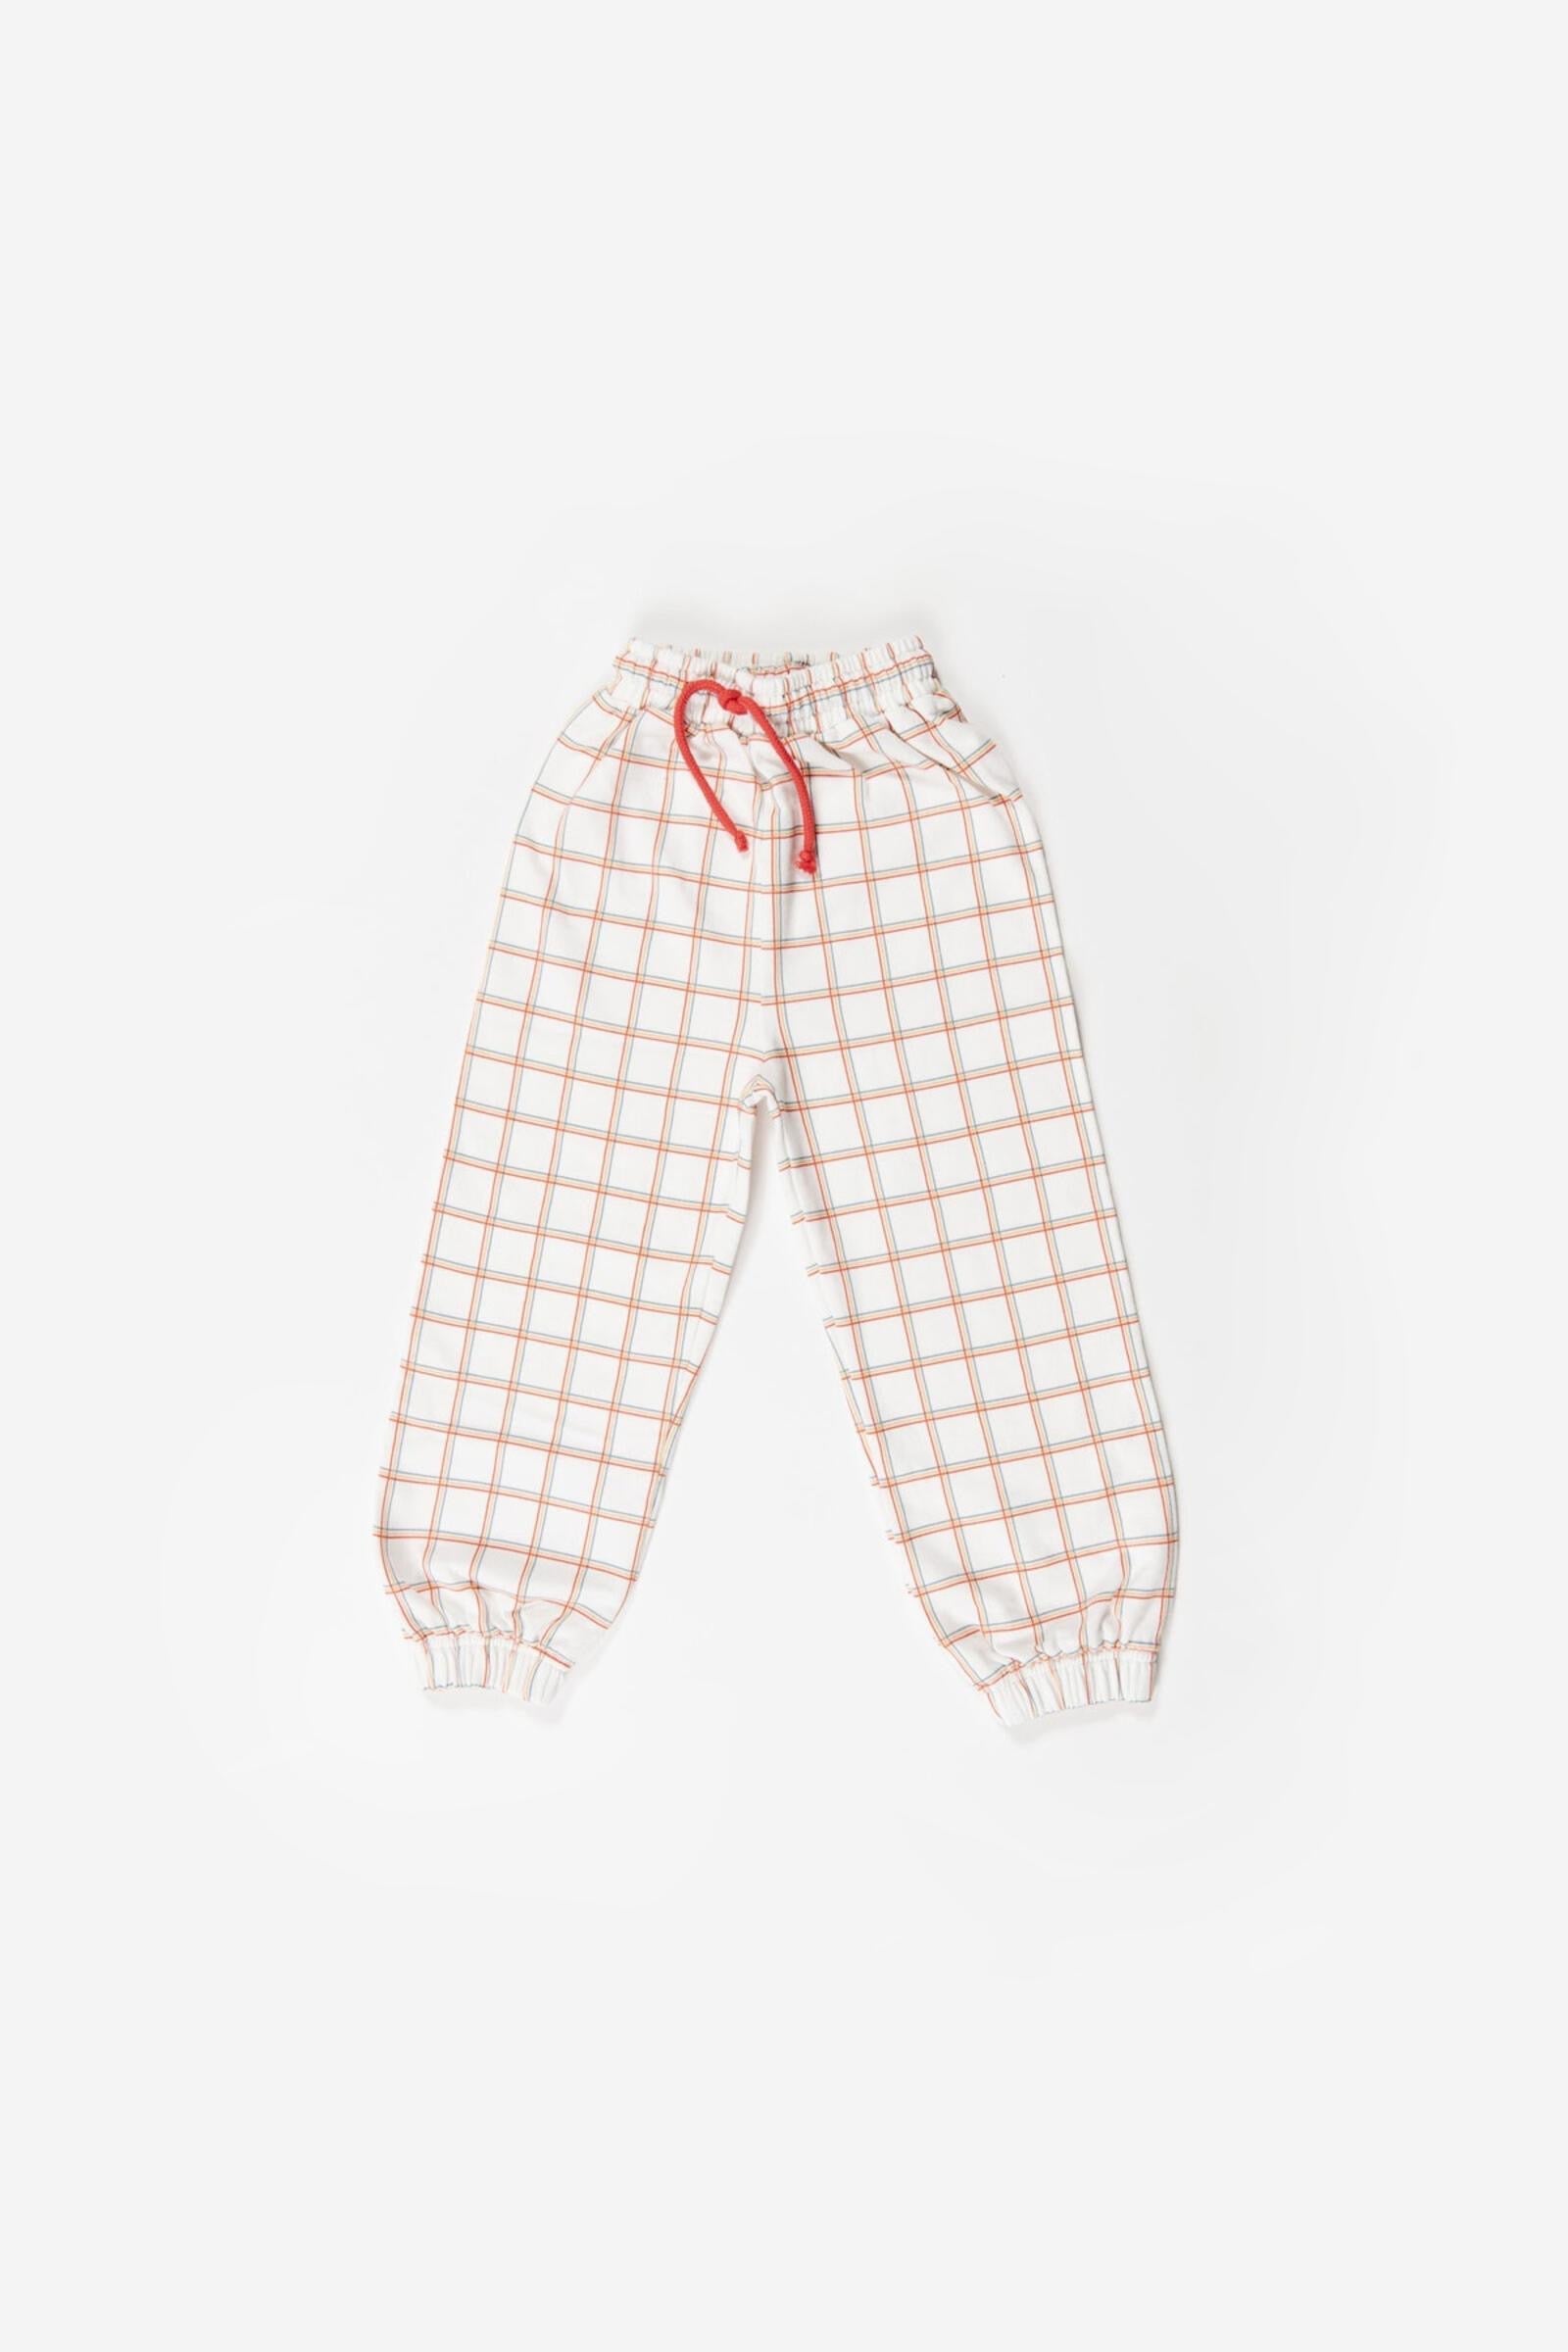 Terry Track Pants - Grid Print Children's Clothing Fin & Vince 